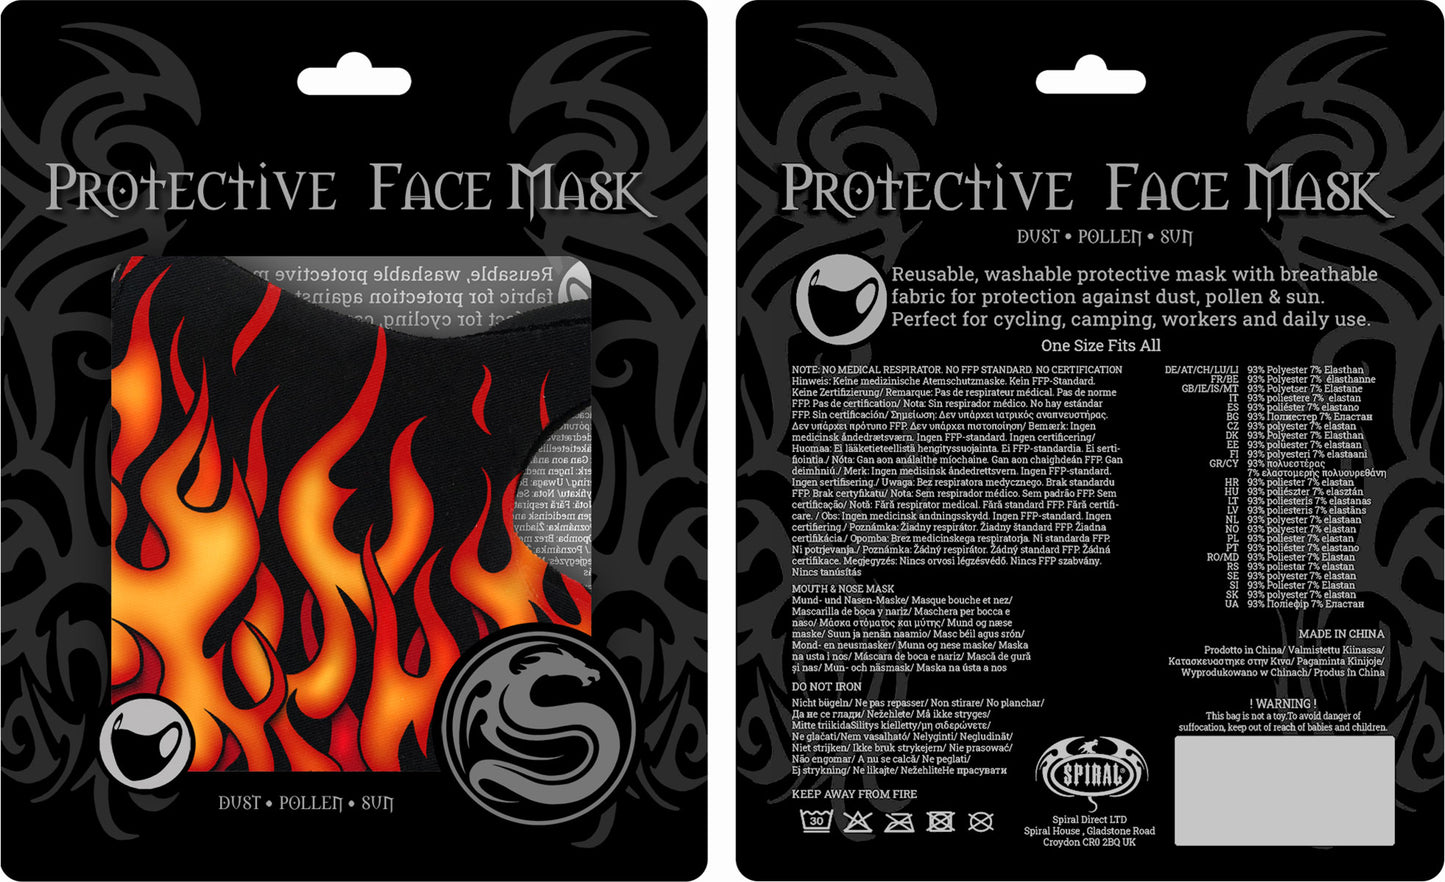 Tribal Flames Face Mask (Spiral)